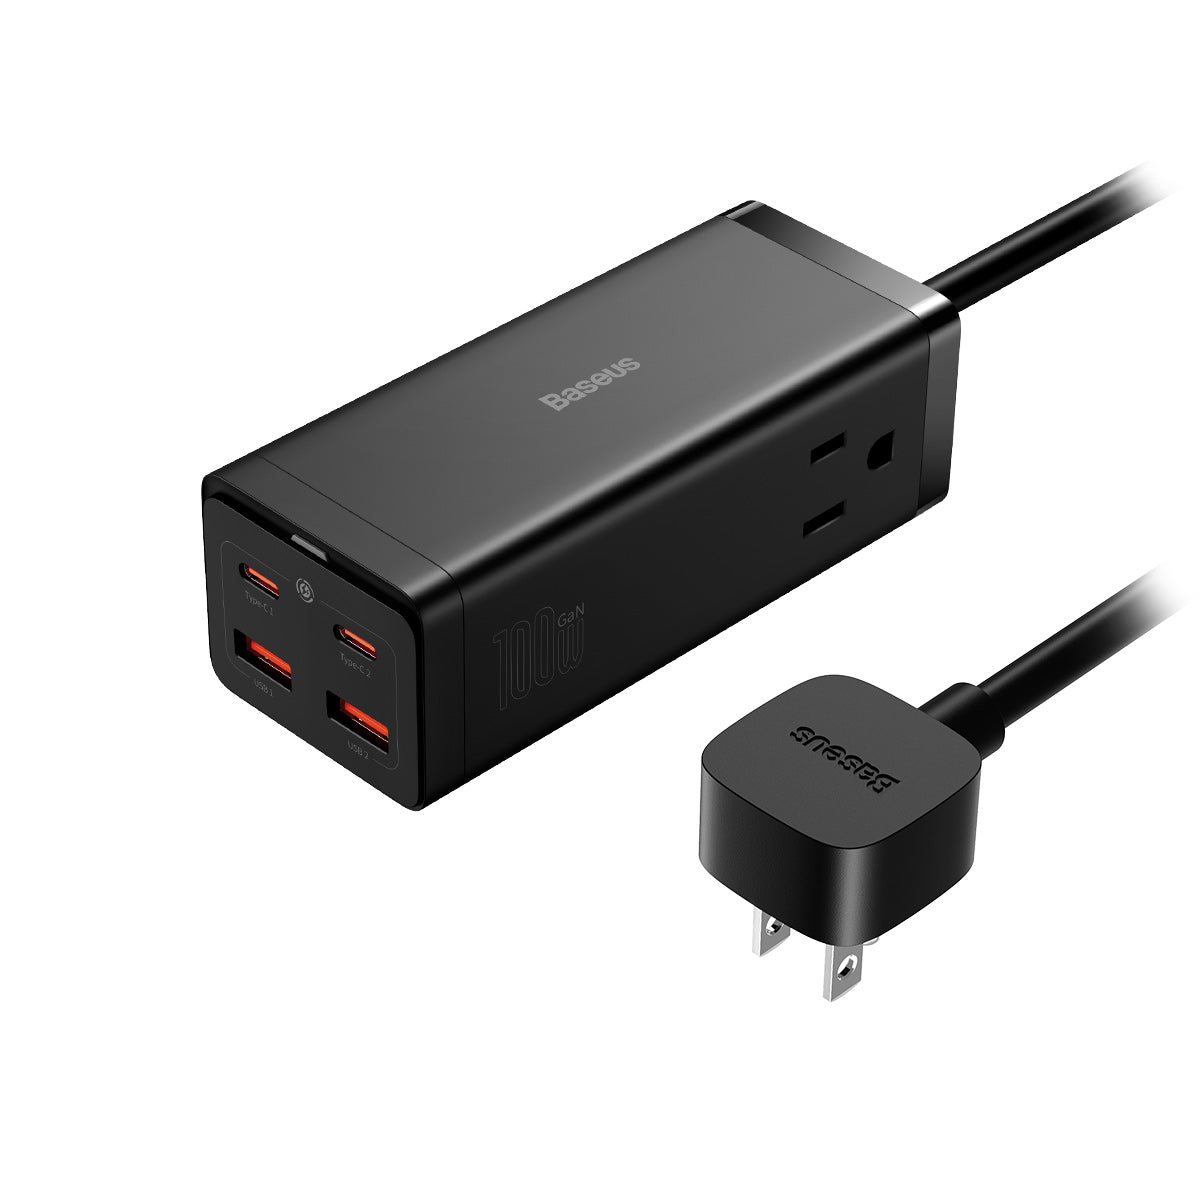 Anker Japan 40W 4Port USB Charger Power Adapter Charg iPhone/iPad/Andoroid  Black